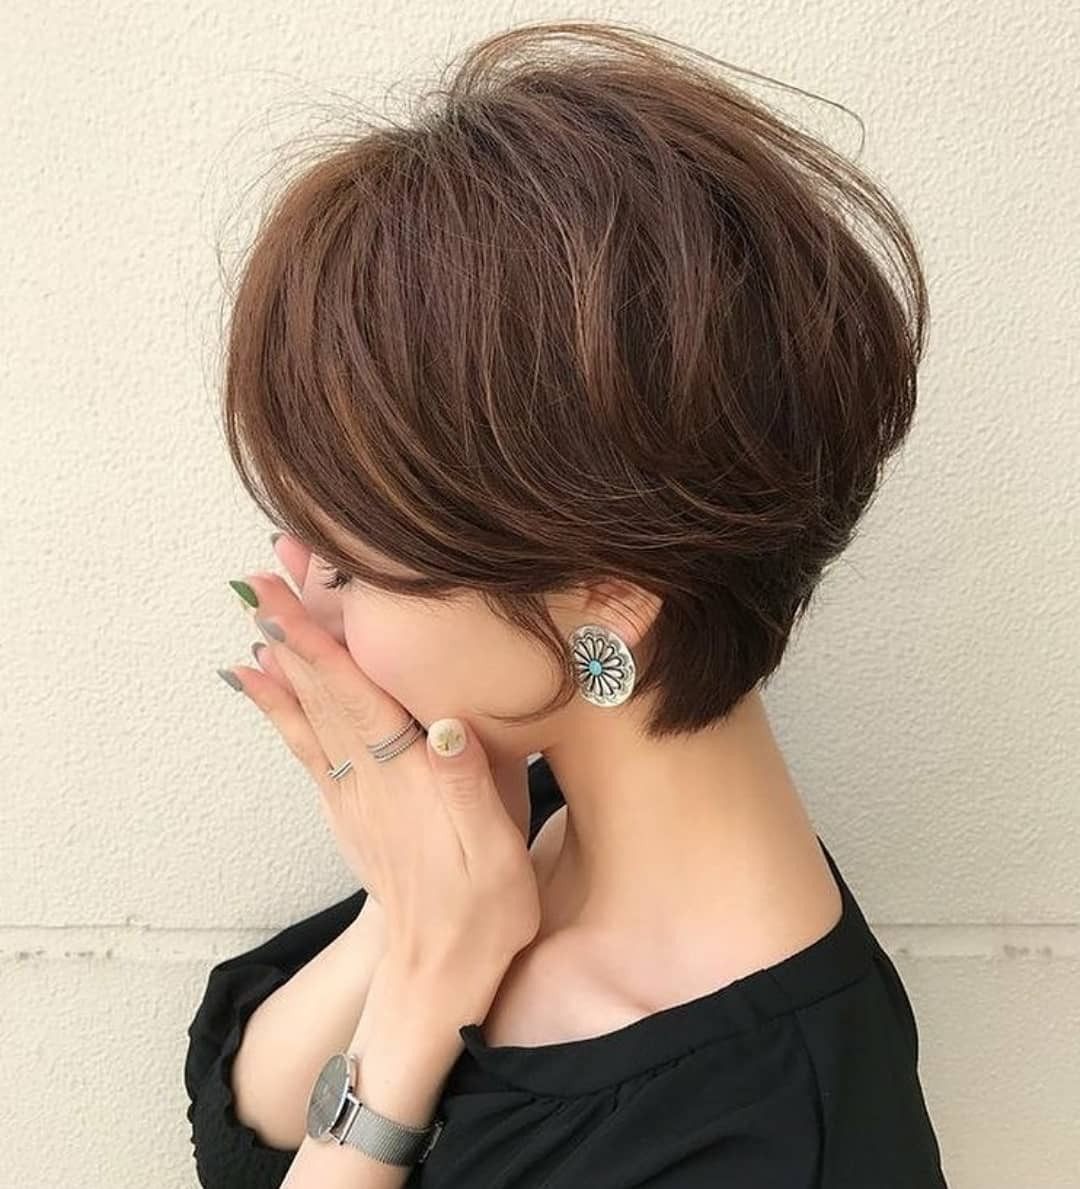 Cute Short Haircuts For Teenage Girl
 10 Cute Short Hairstyles and Haircuts for Young Girls